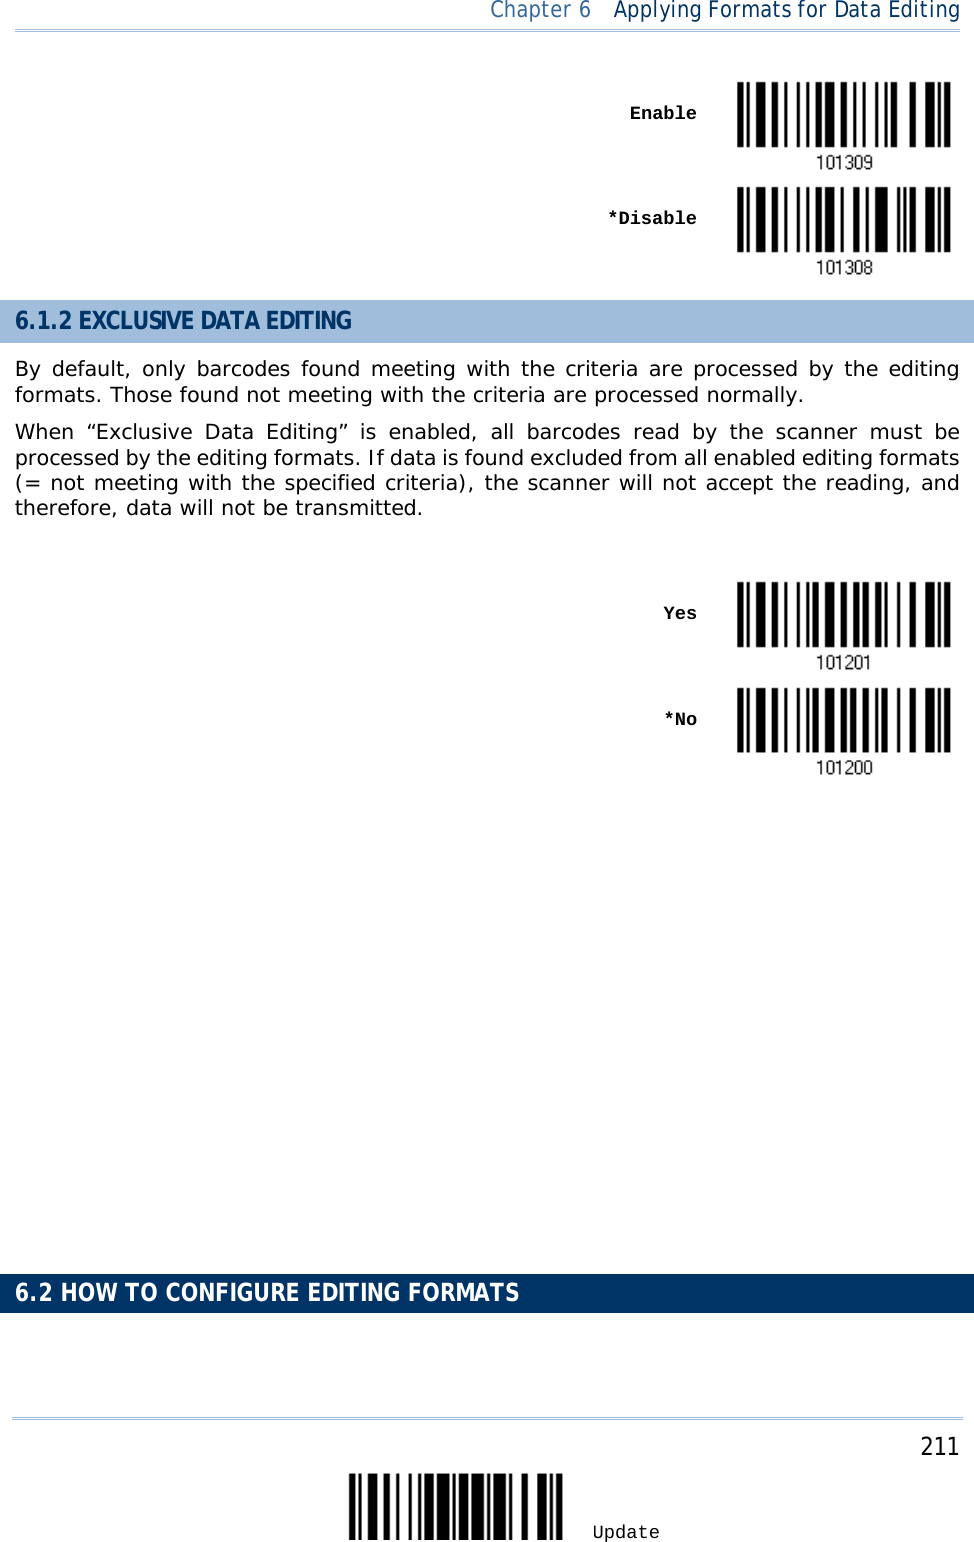  Chapter 6  Applying Formats for Data Editing     Enable     *Disable  6.1.2 EXCLUSIVE DATA EDITING By default, only barcodes found meeting with the criteria are processed by the editing formats. Those found not meeting with the criteria are processed normally. When  “Exclusive Data Editing” is enabled, all barcodes read by the scanner must be processed by the editing formats. If data is found excluded from all enabled editing formats (= not meeting with the specified criteria), the scanner will not accept the reading, and therefore, data will not be transmitted.     Yes     *No                        6.2 HOW TO CONFIGURE EDITING FORMATS     211 Update 